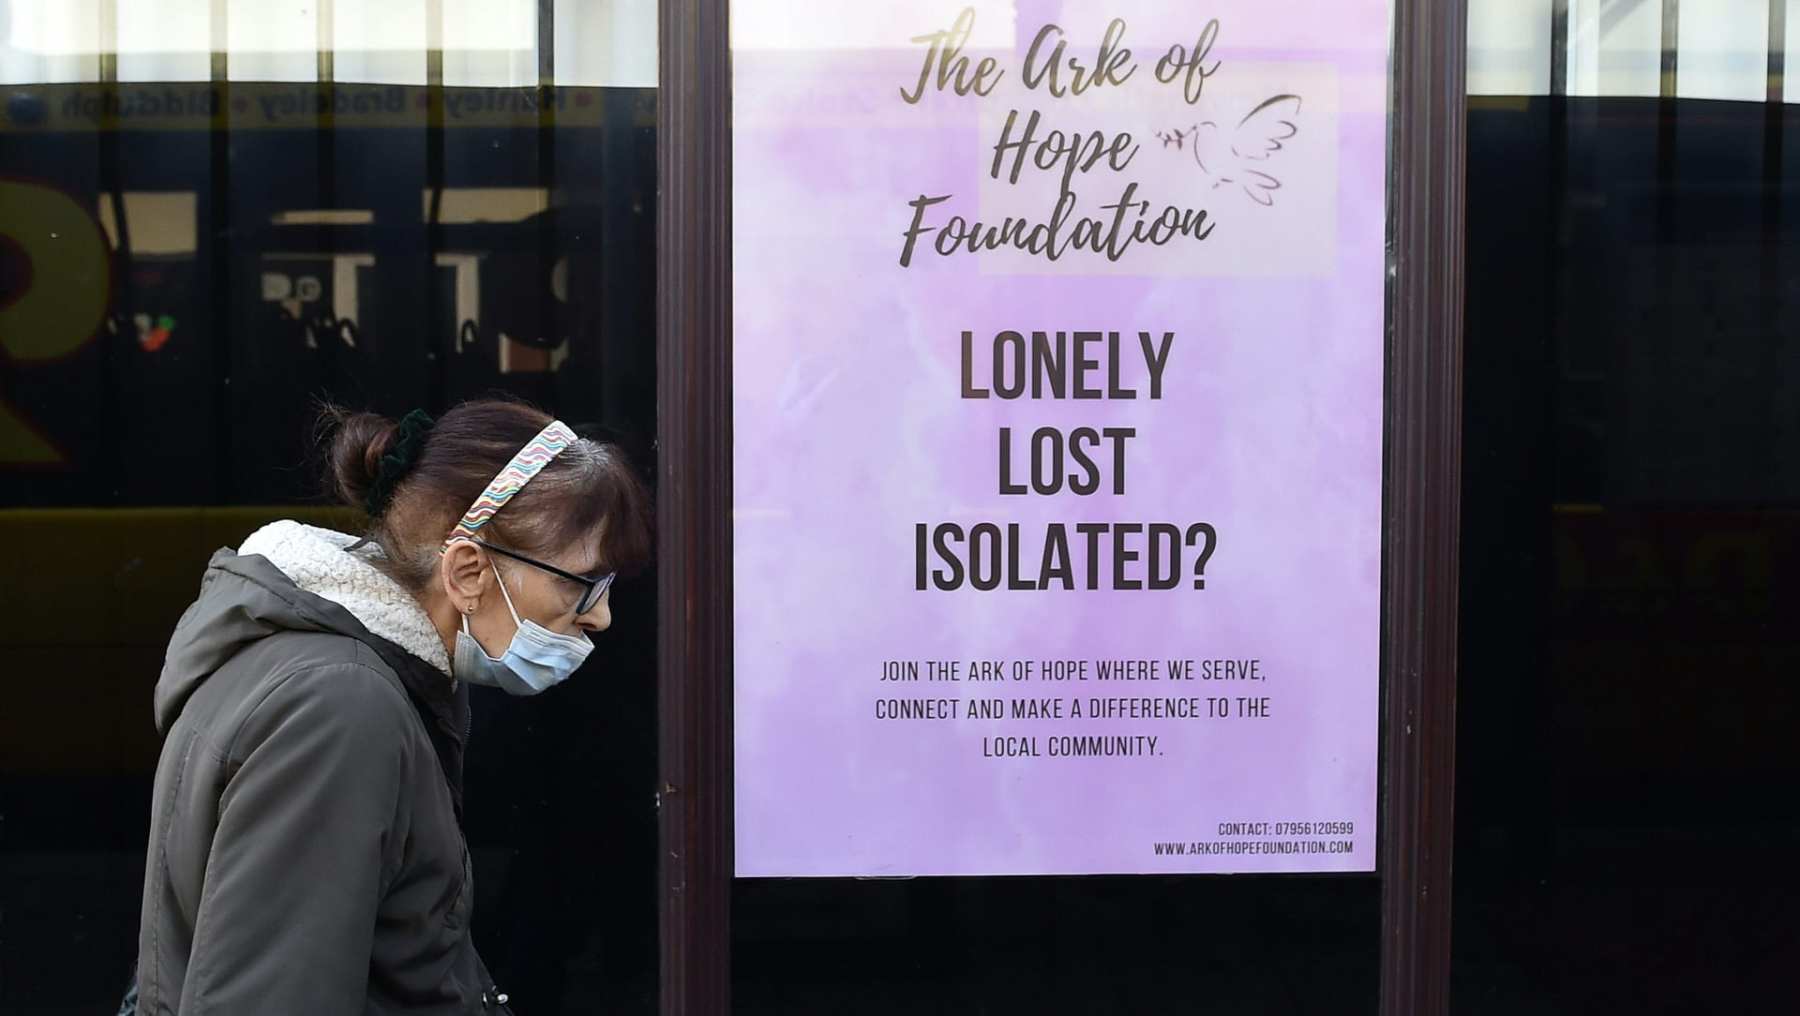 A woman wearing a mask walks past a sign that reads "Lonely, lost, isolated?"